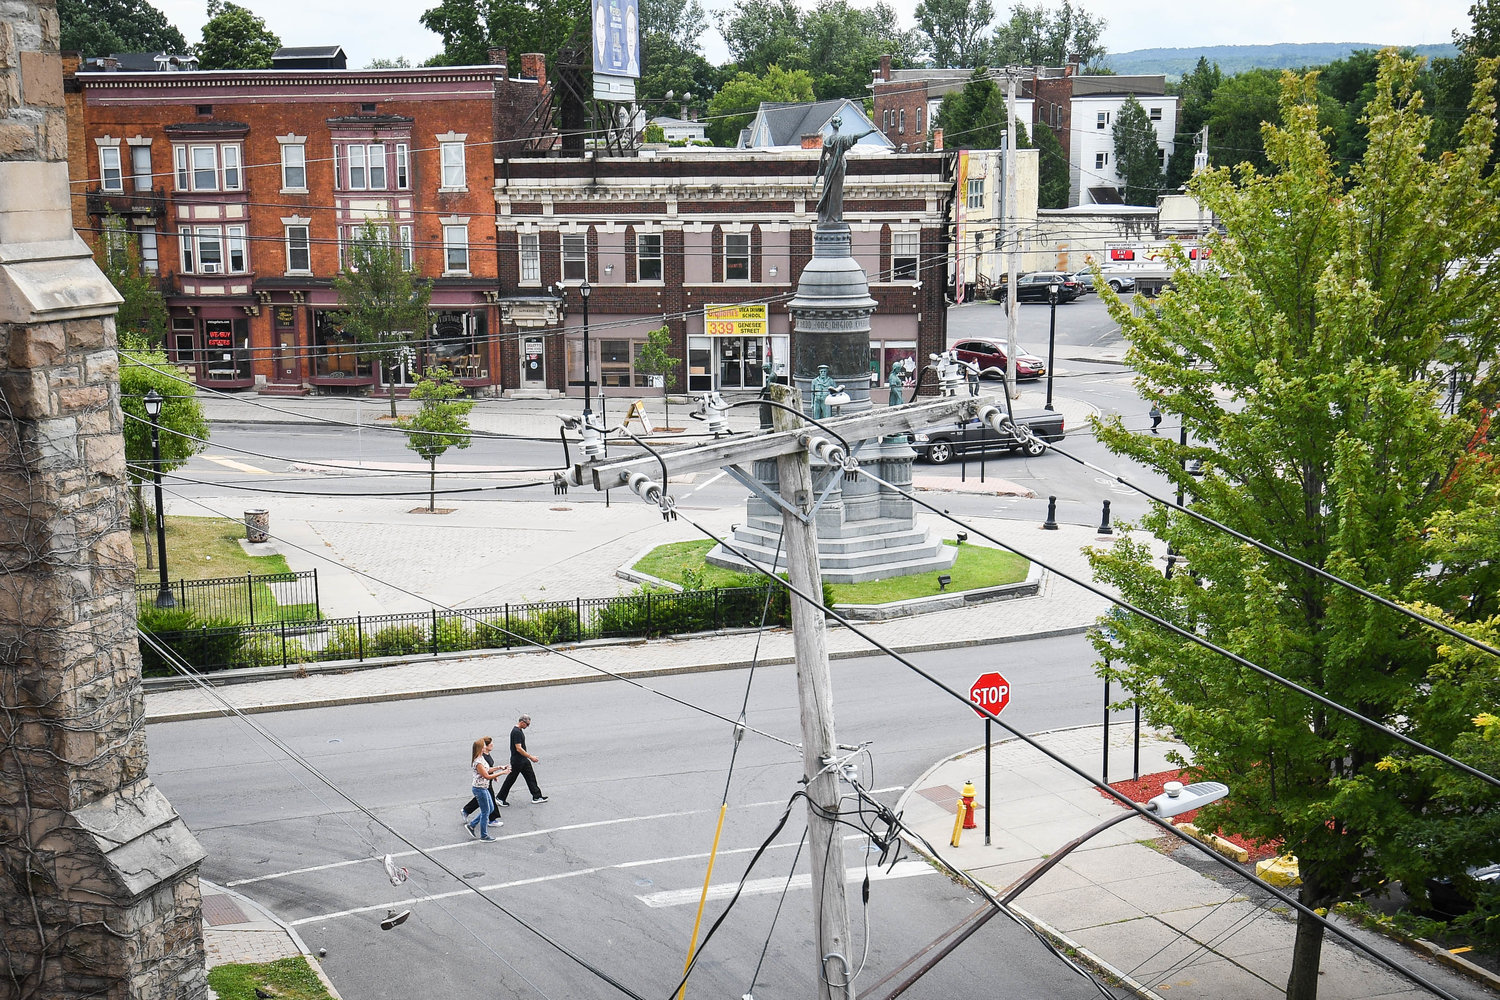 A view of Oneida Square from the roof of Cornerstone Plymouth Bethesda Church in Utica.